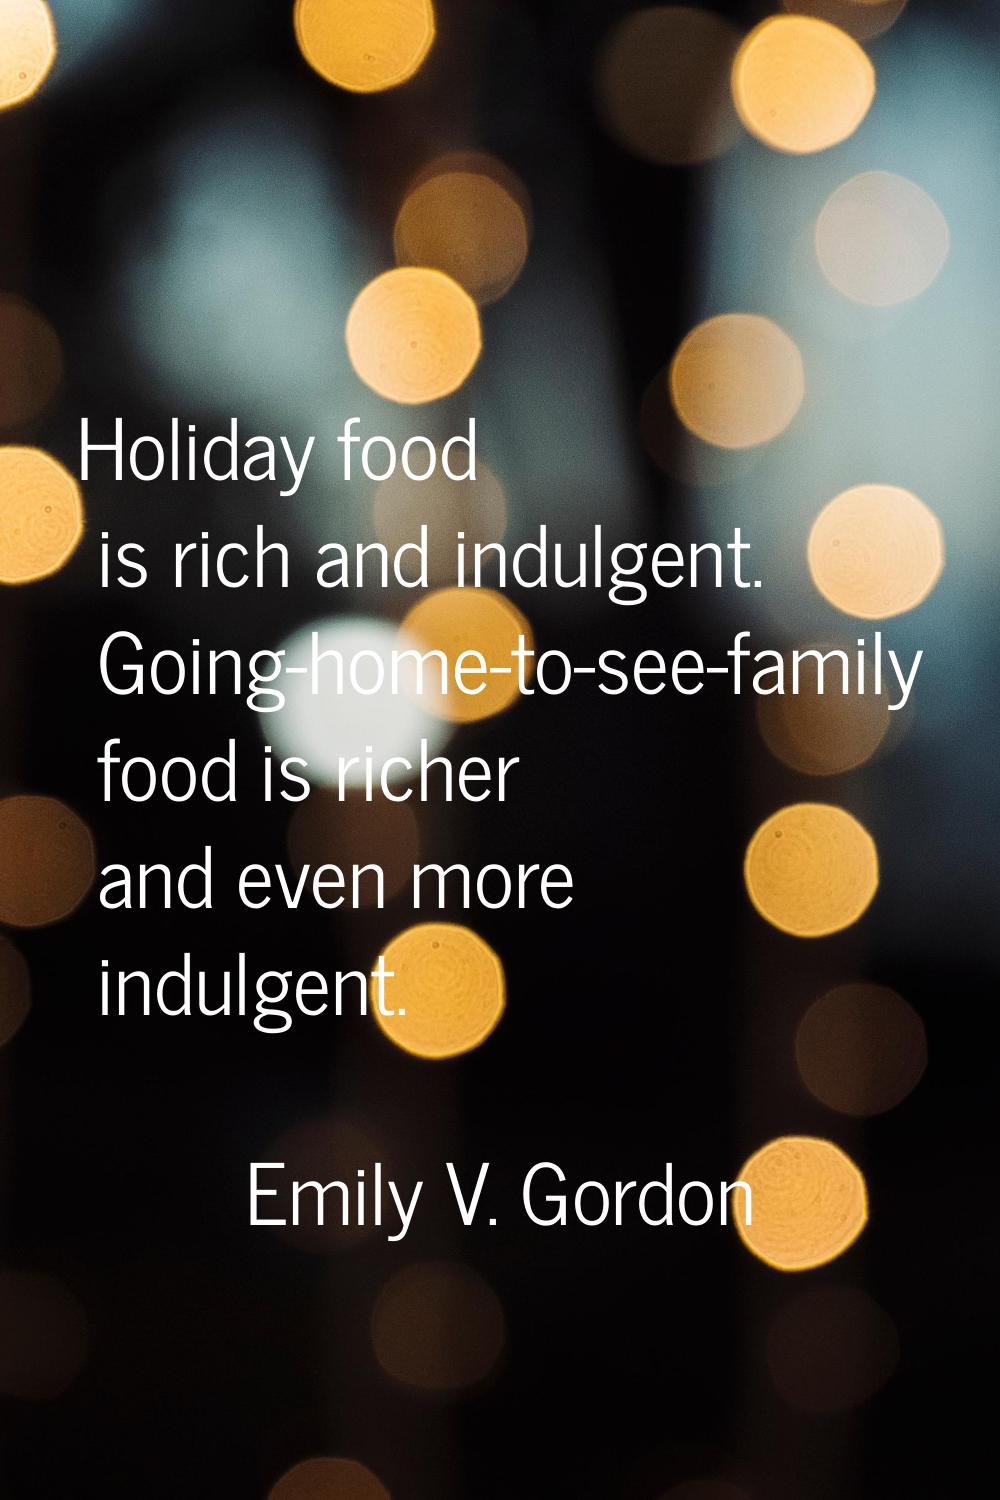 Holiday food is rich and indulgent. Going-home-to-see-family food is richer and even more indulgent